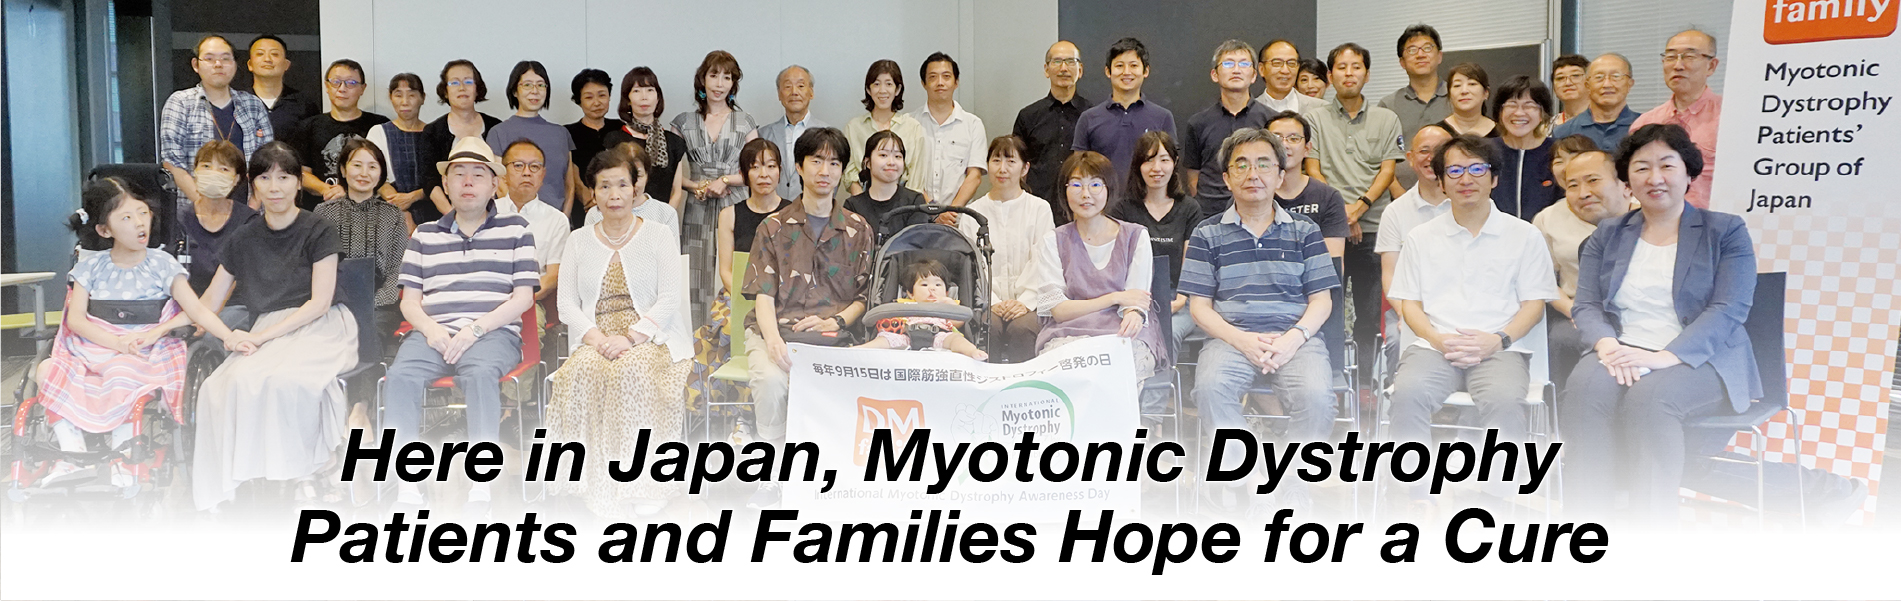 Here in Japan, Myotonic Dystrophy Patients and Families Hope for a Cure